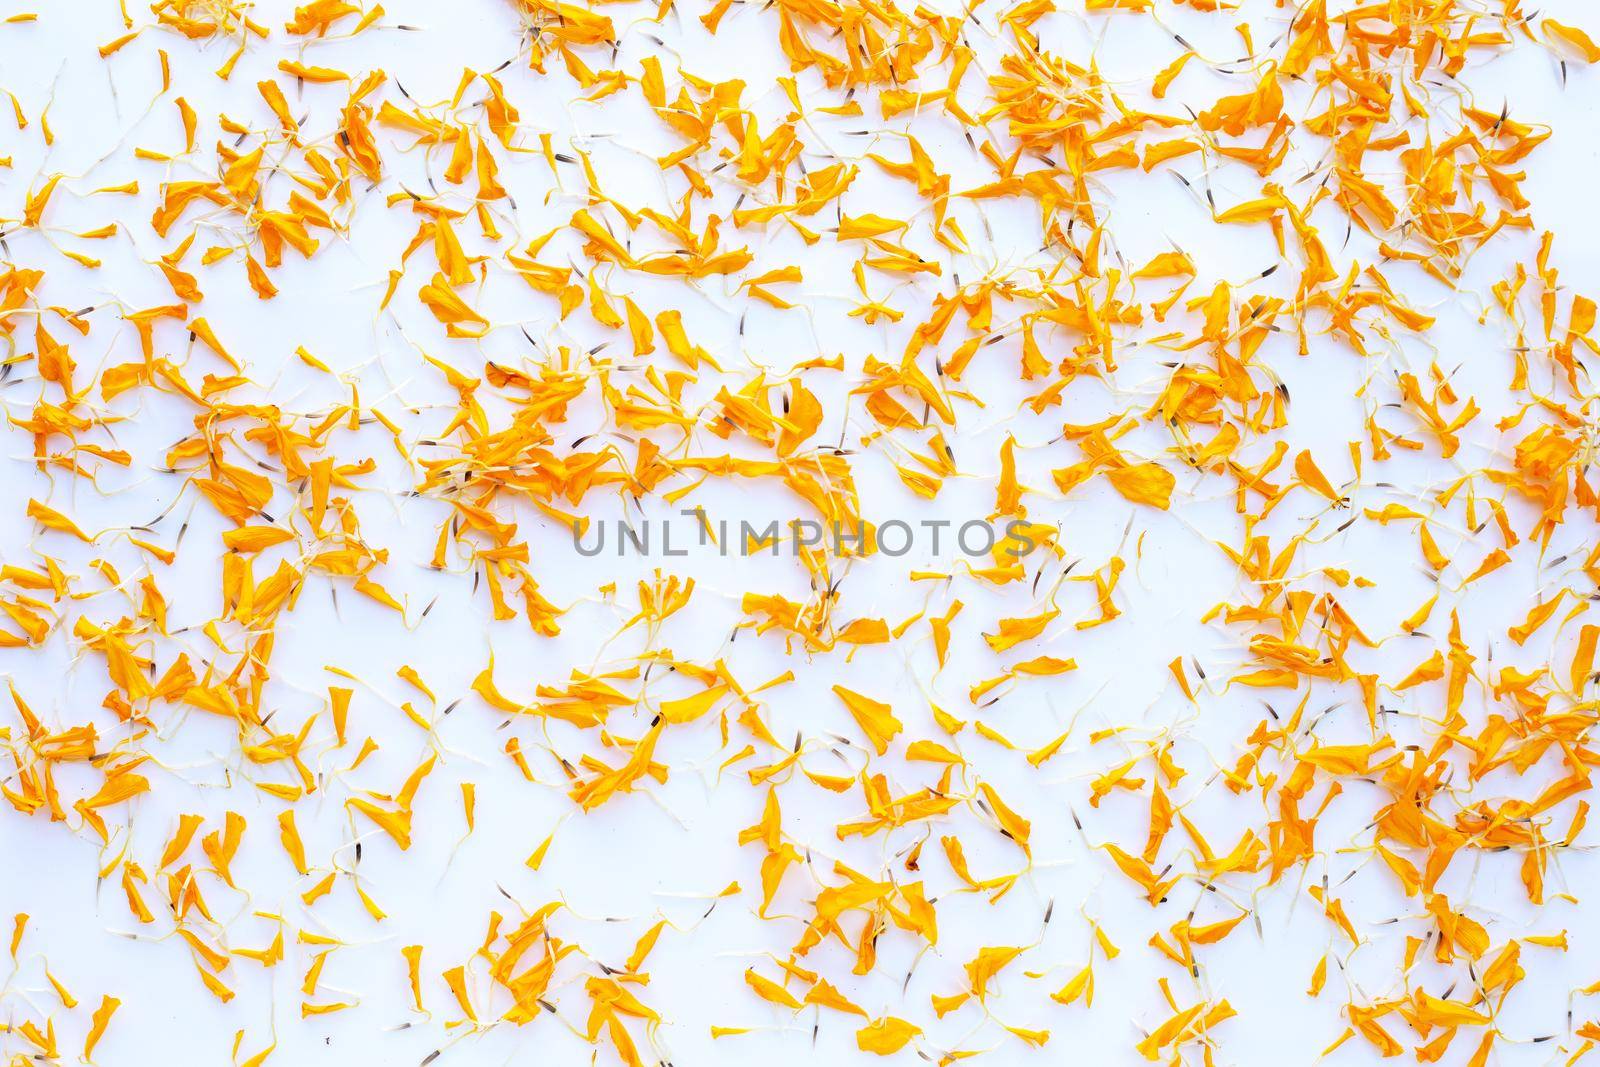 Petals of marigold flower on white background. by Bowonpat